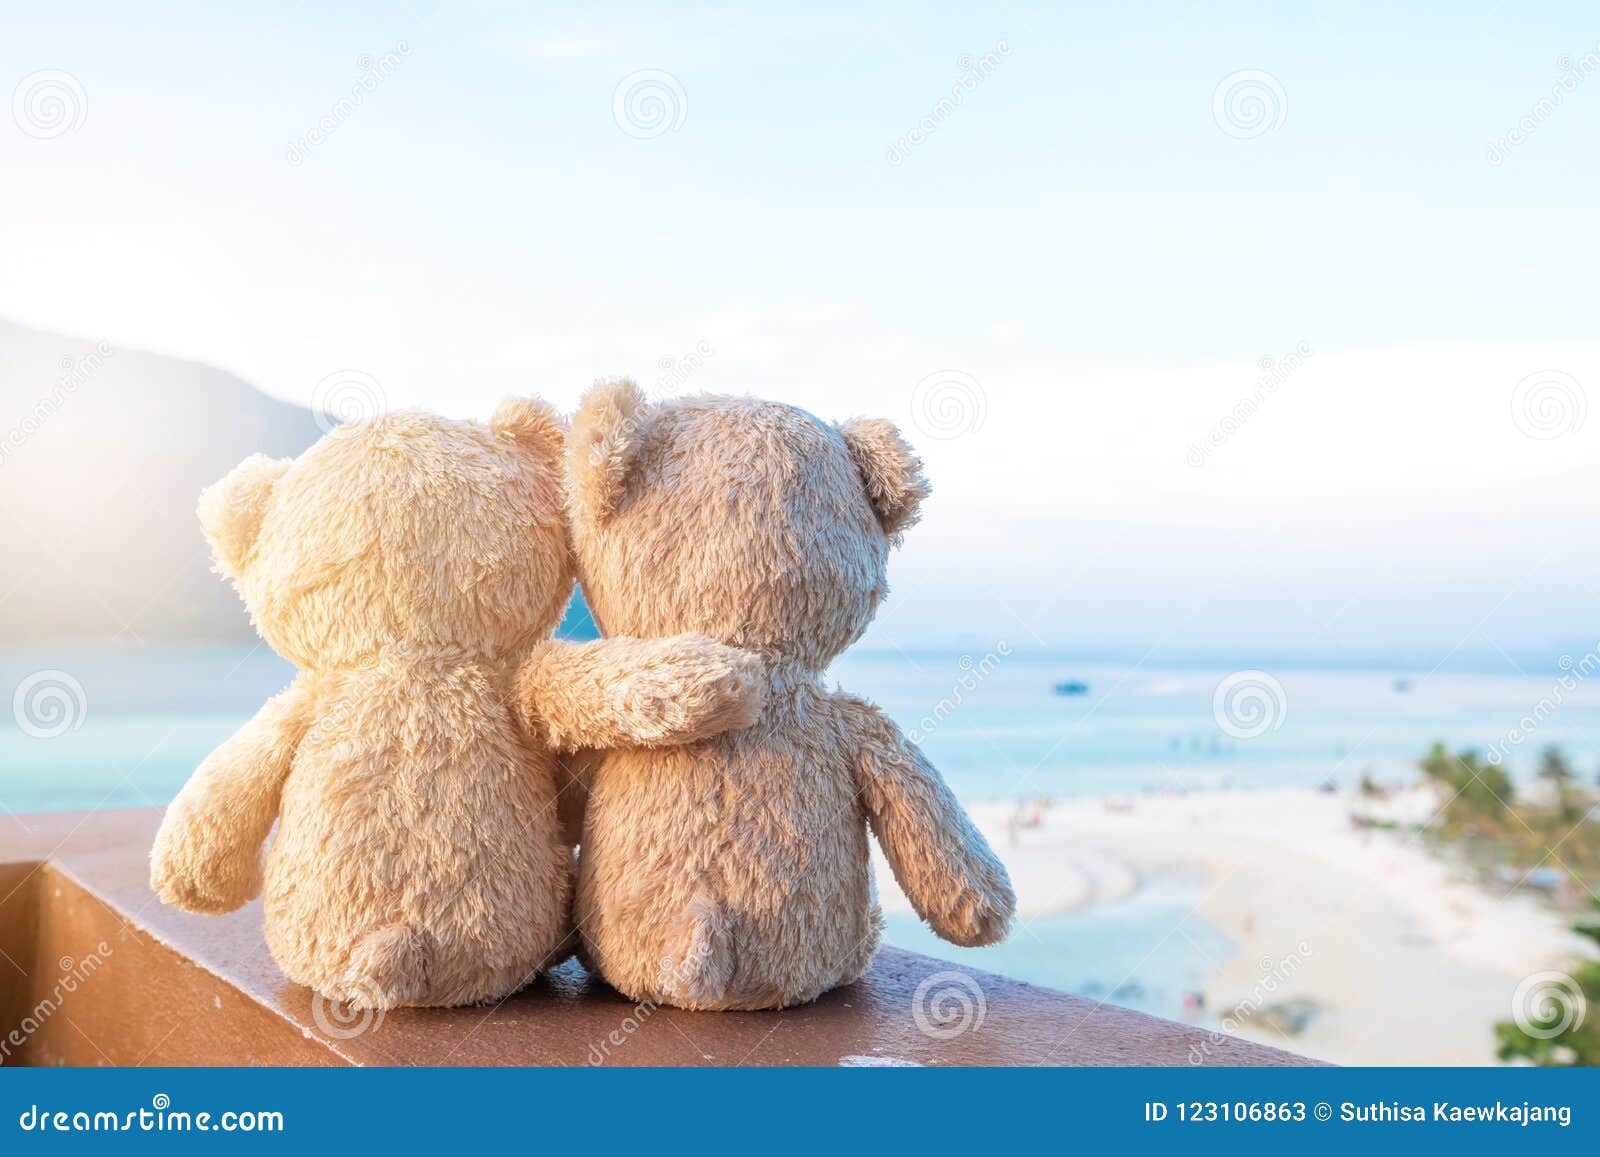 two teddy bears sitting sea view. love and relationship concept.